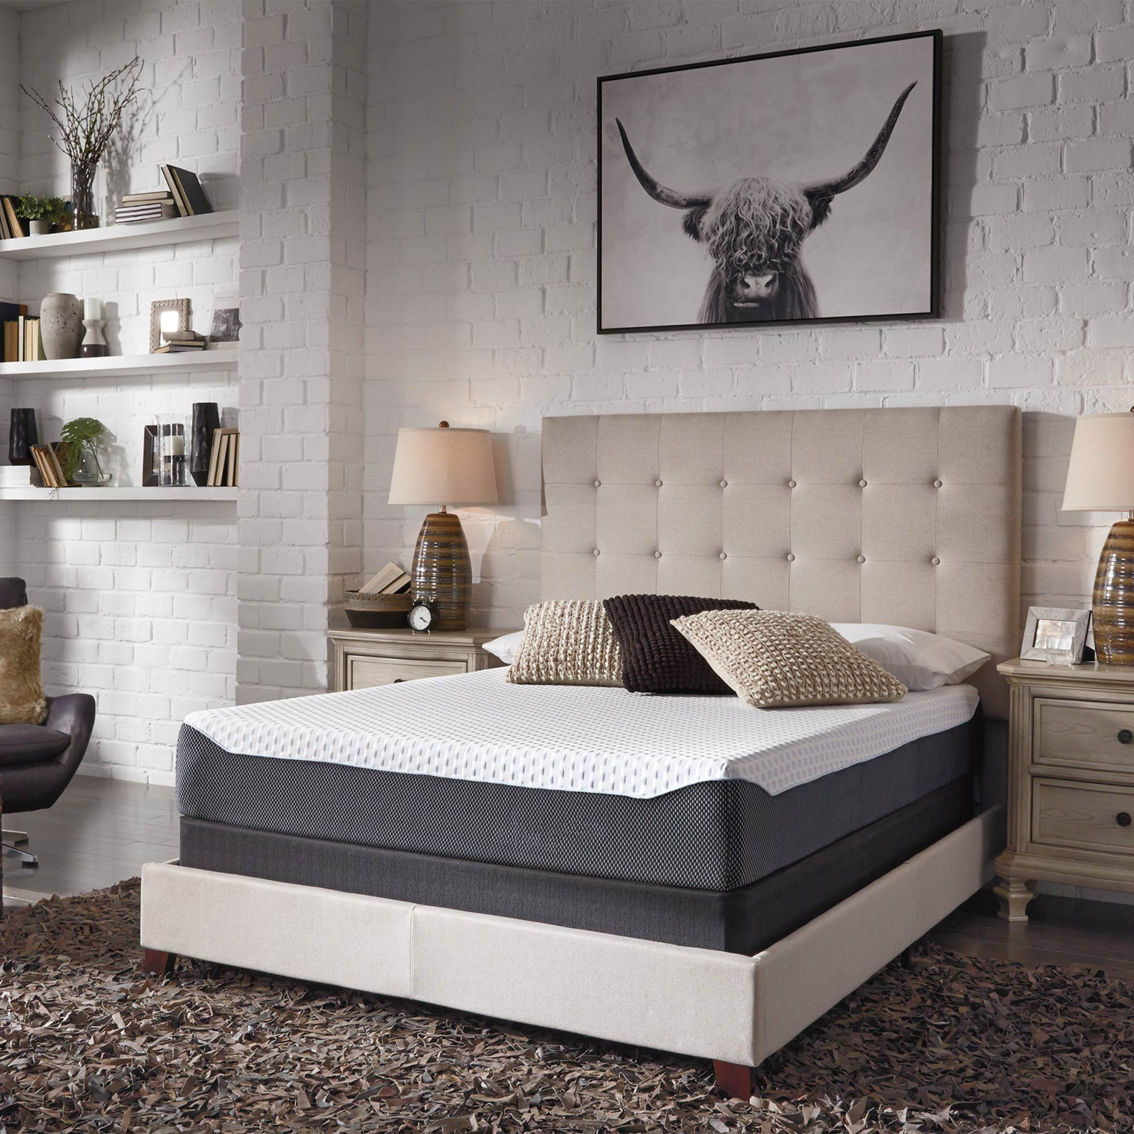 Ashley Chime Express 10 in. Mattress - Image 4 of 4